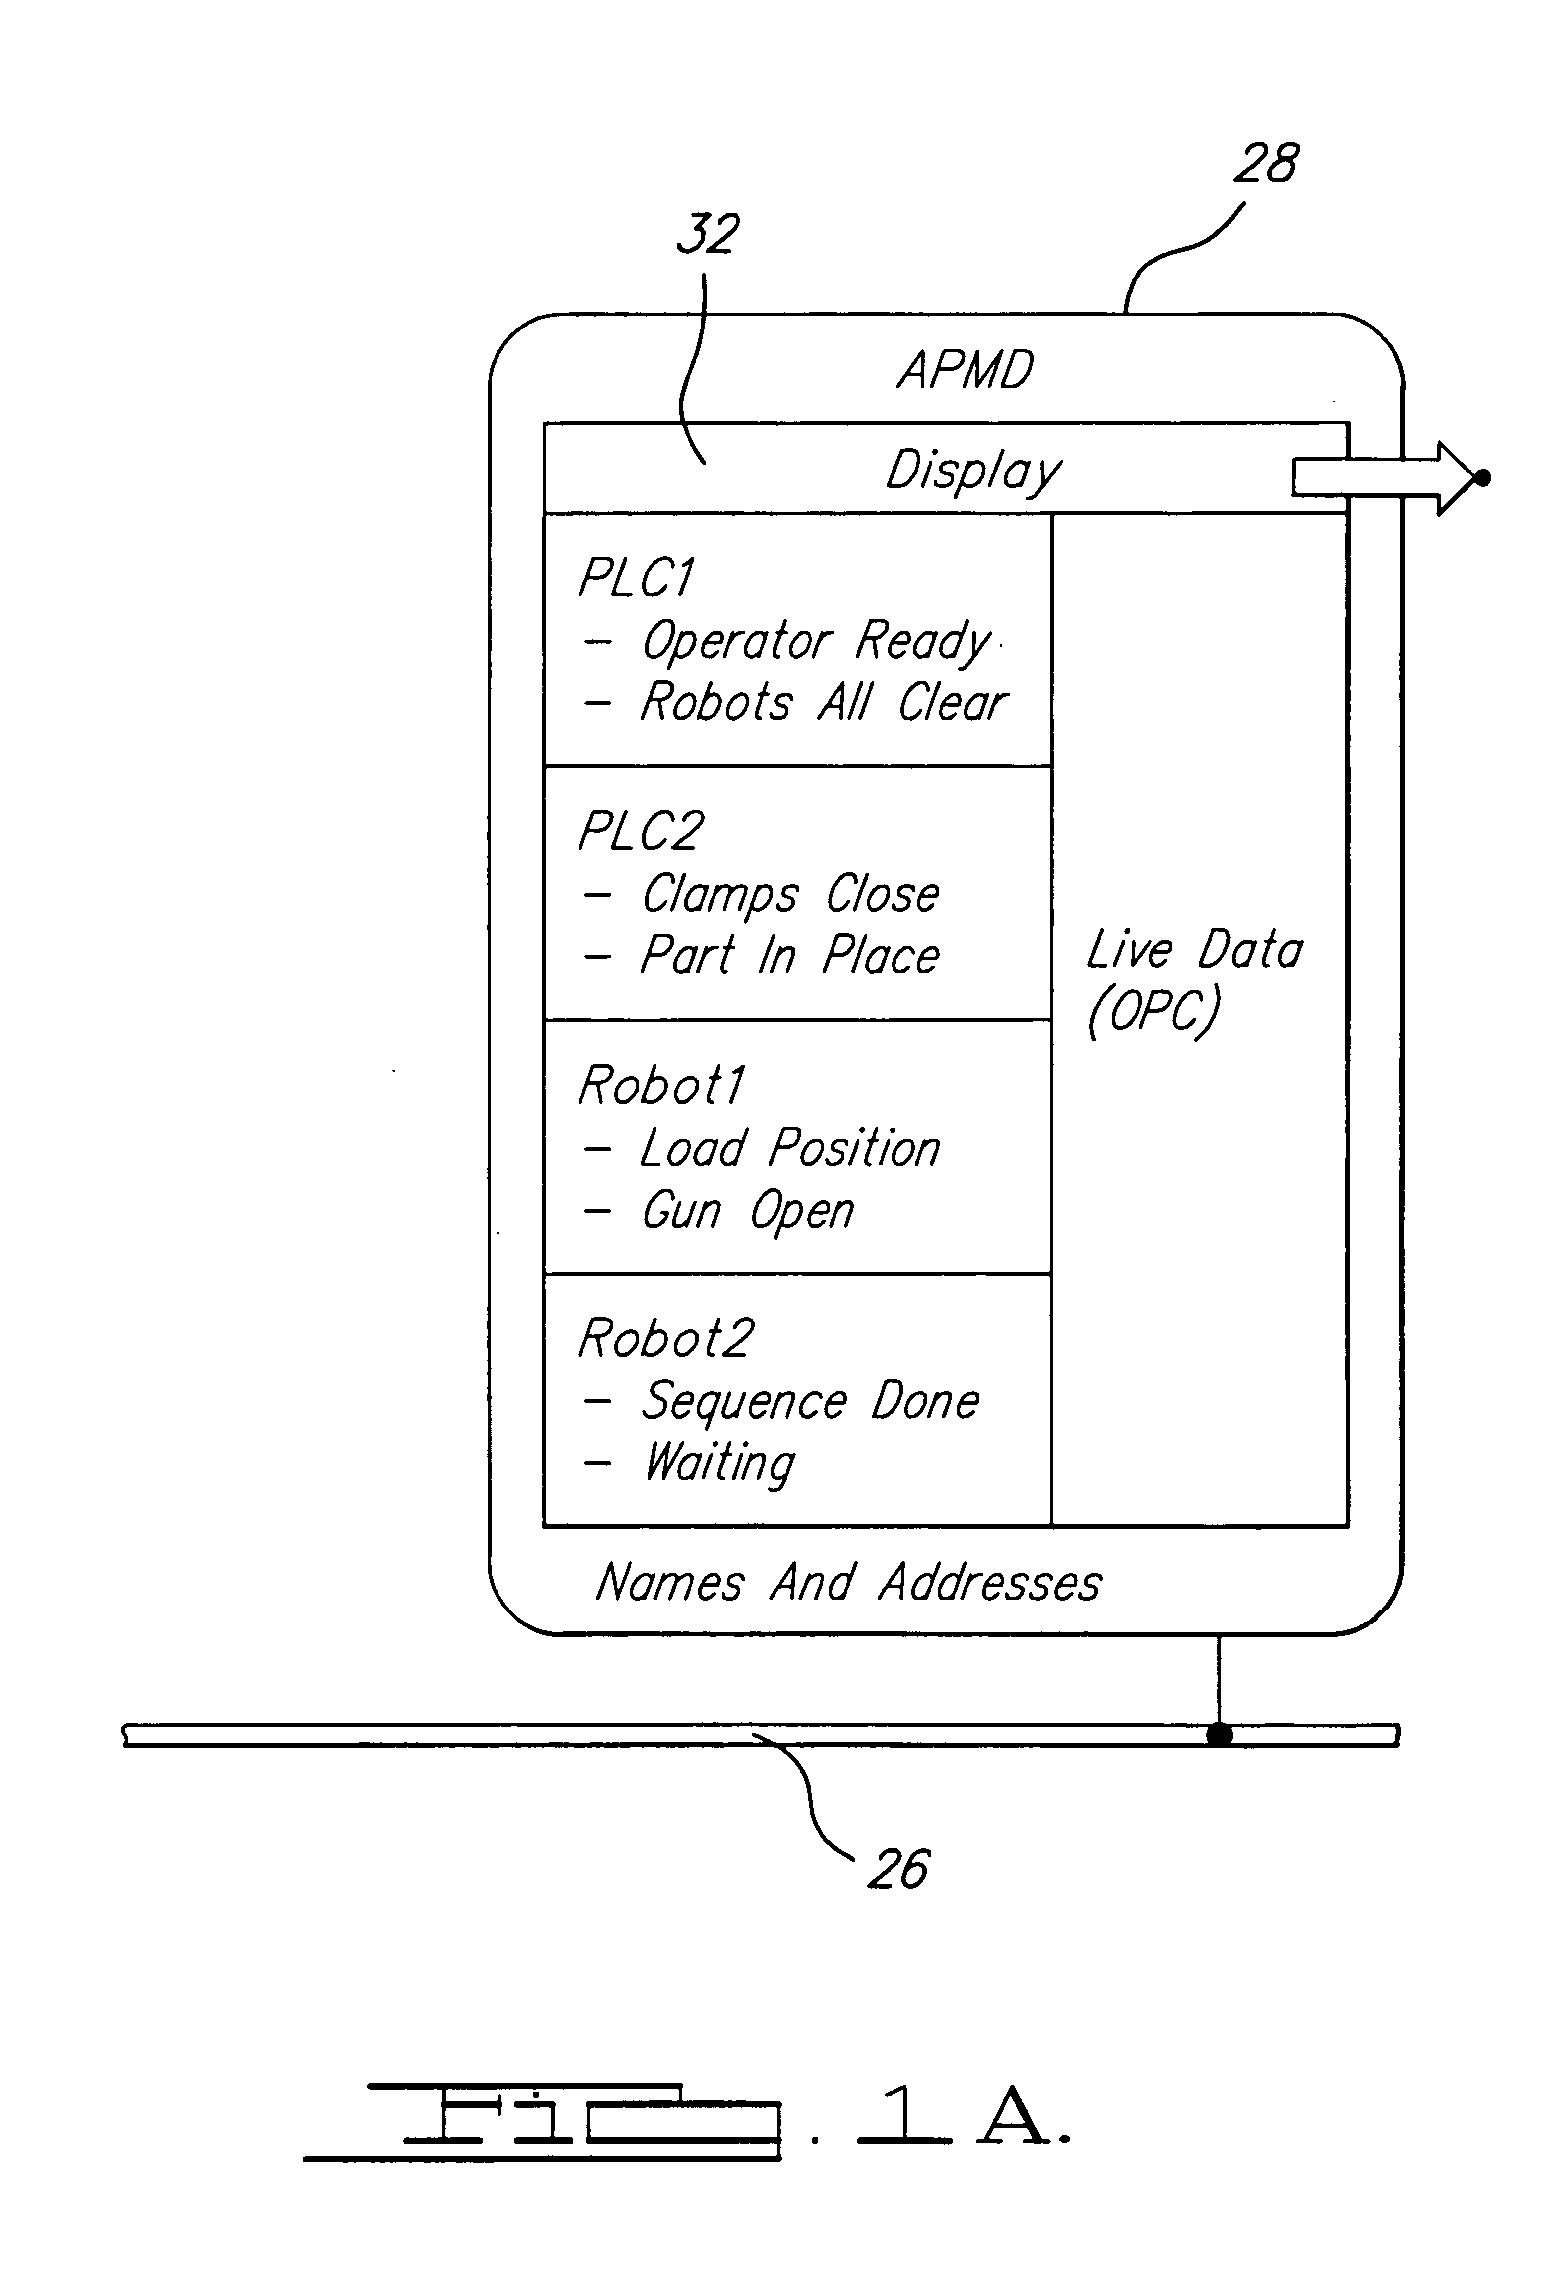 Method of application protocol monitoring for programmable logic controllers